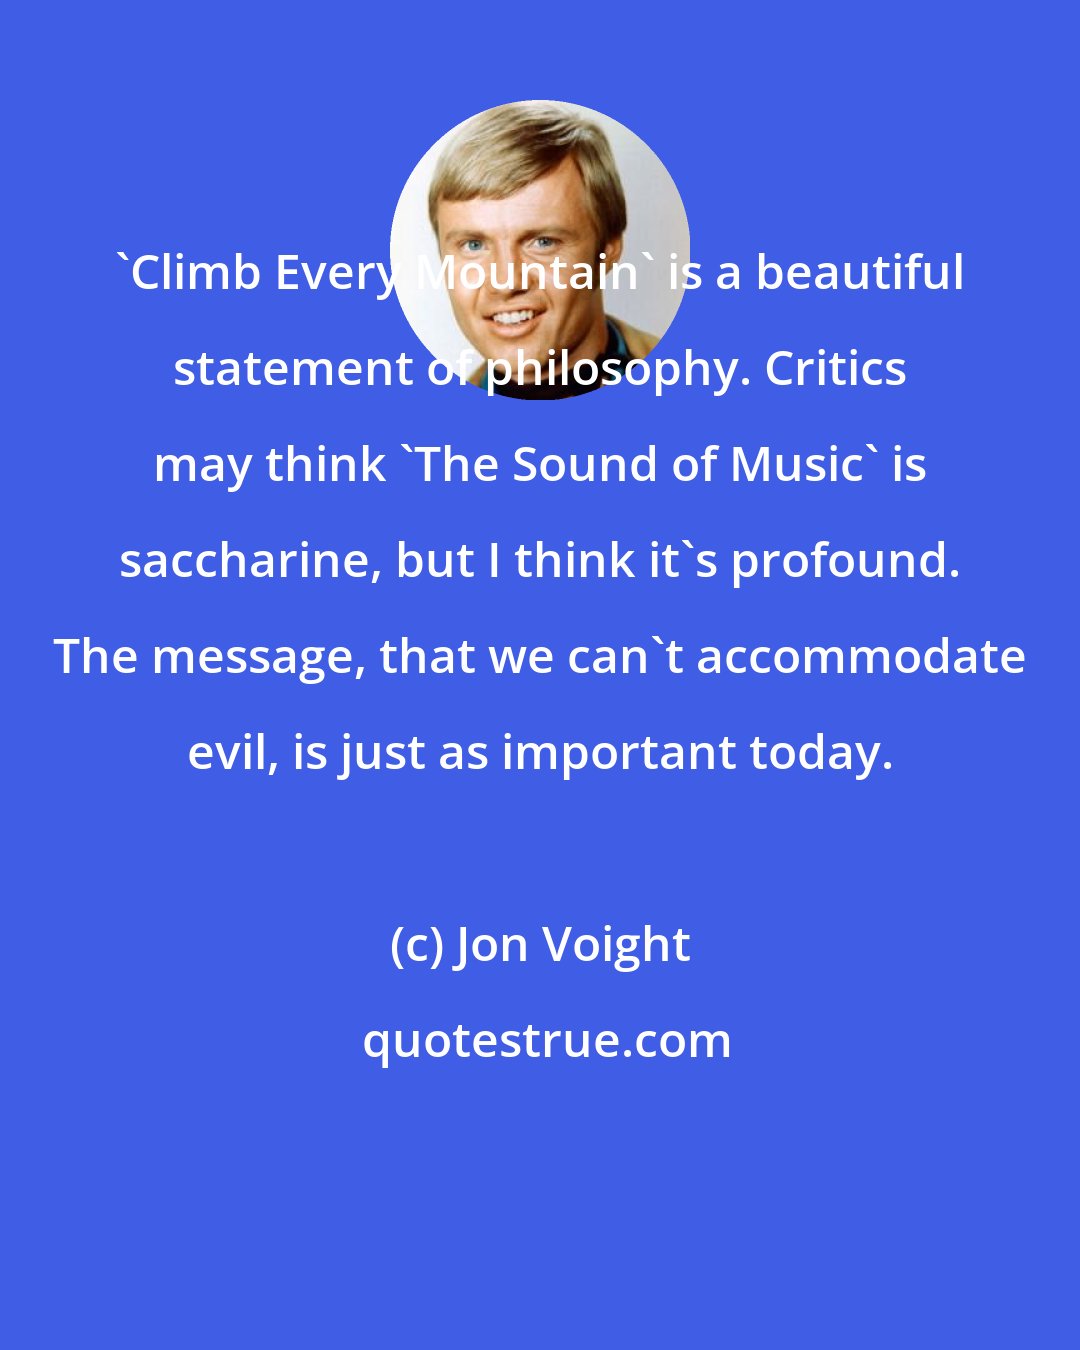 Jon Voight: 'Climb Every Mountain' is a beautiful statement of philosophy. Critics may think 'The Sound of Music' is saccharine, but I think it's profound. The message, that we can't accommodate evil, is just as important today.